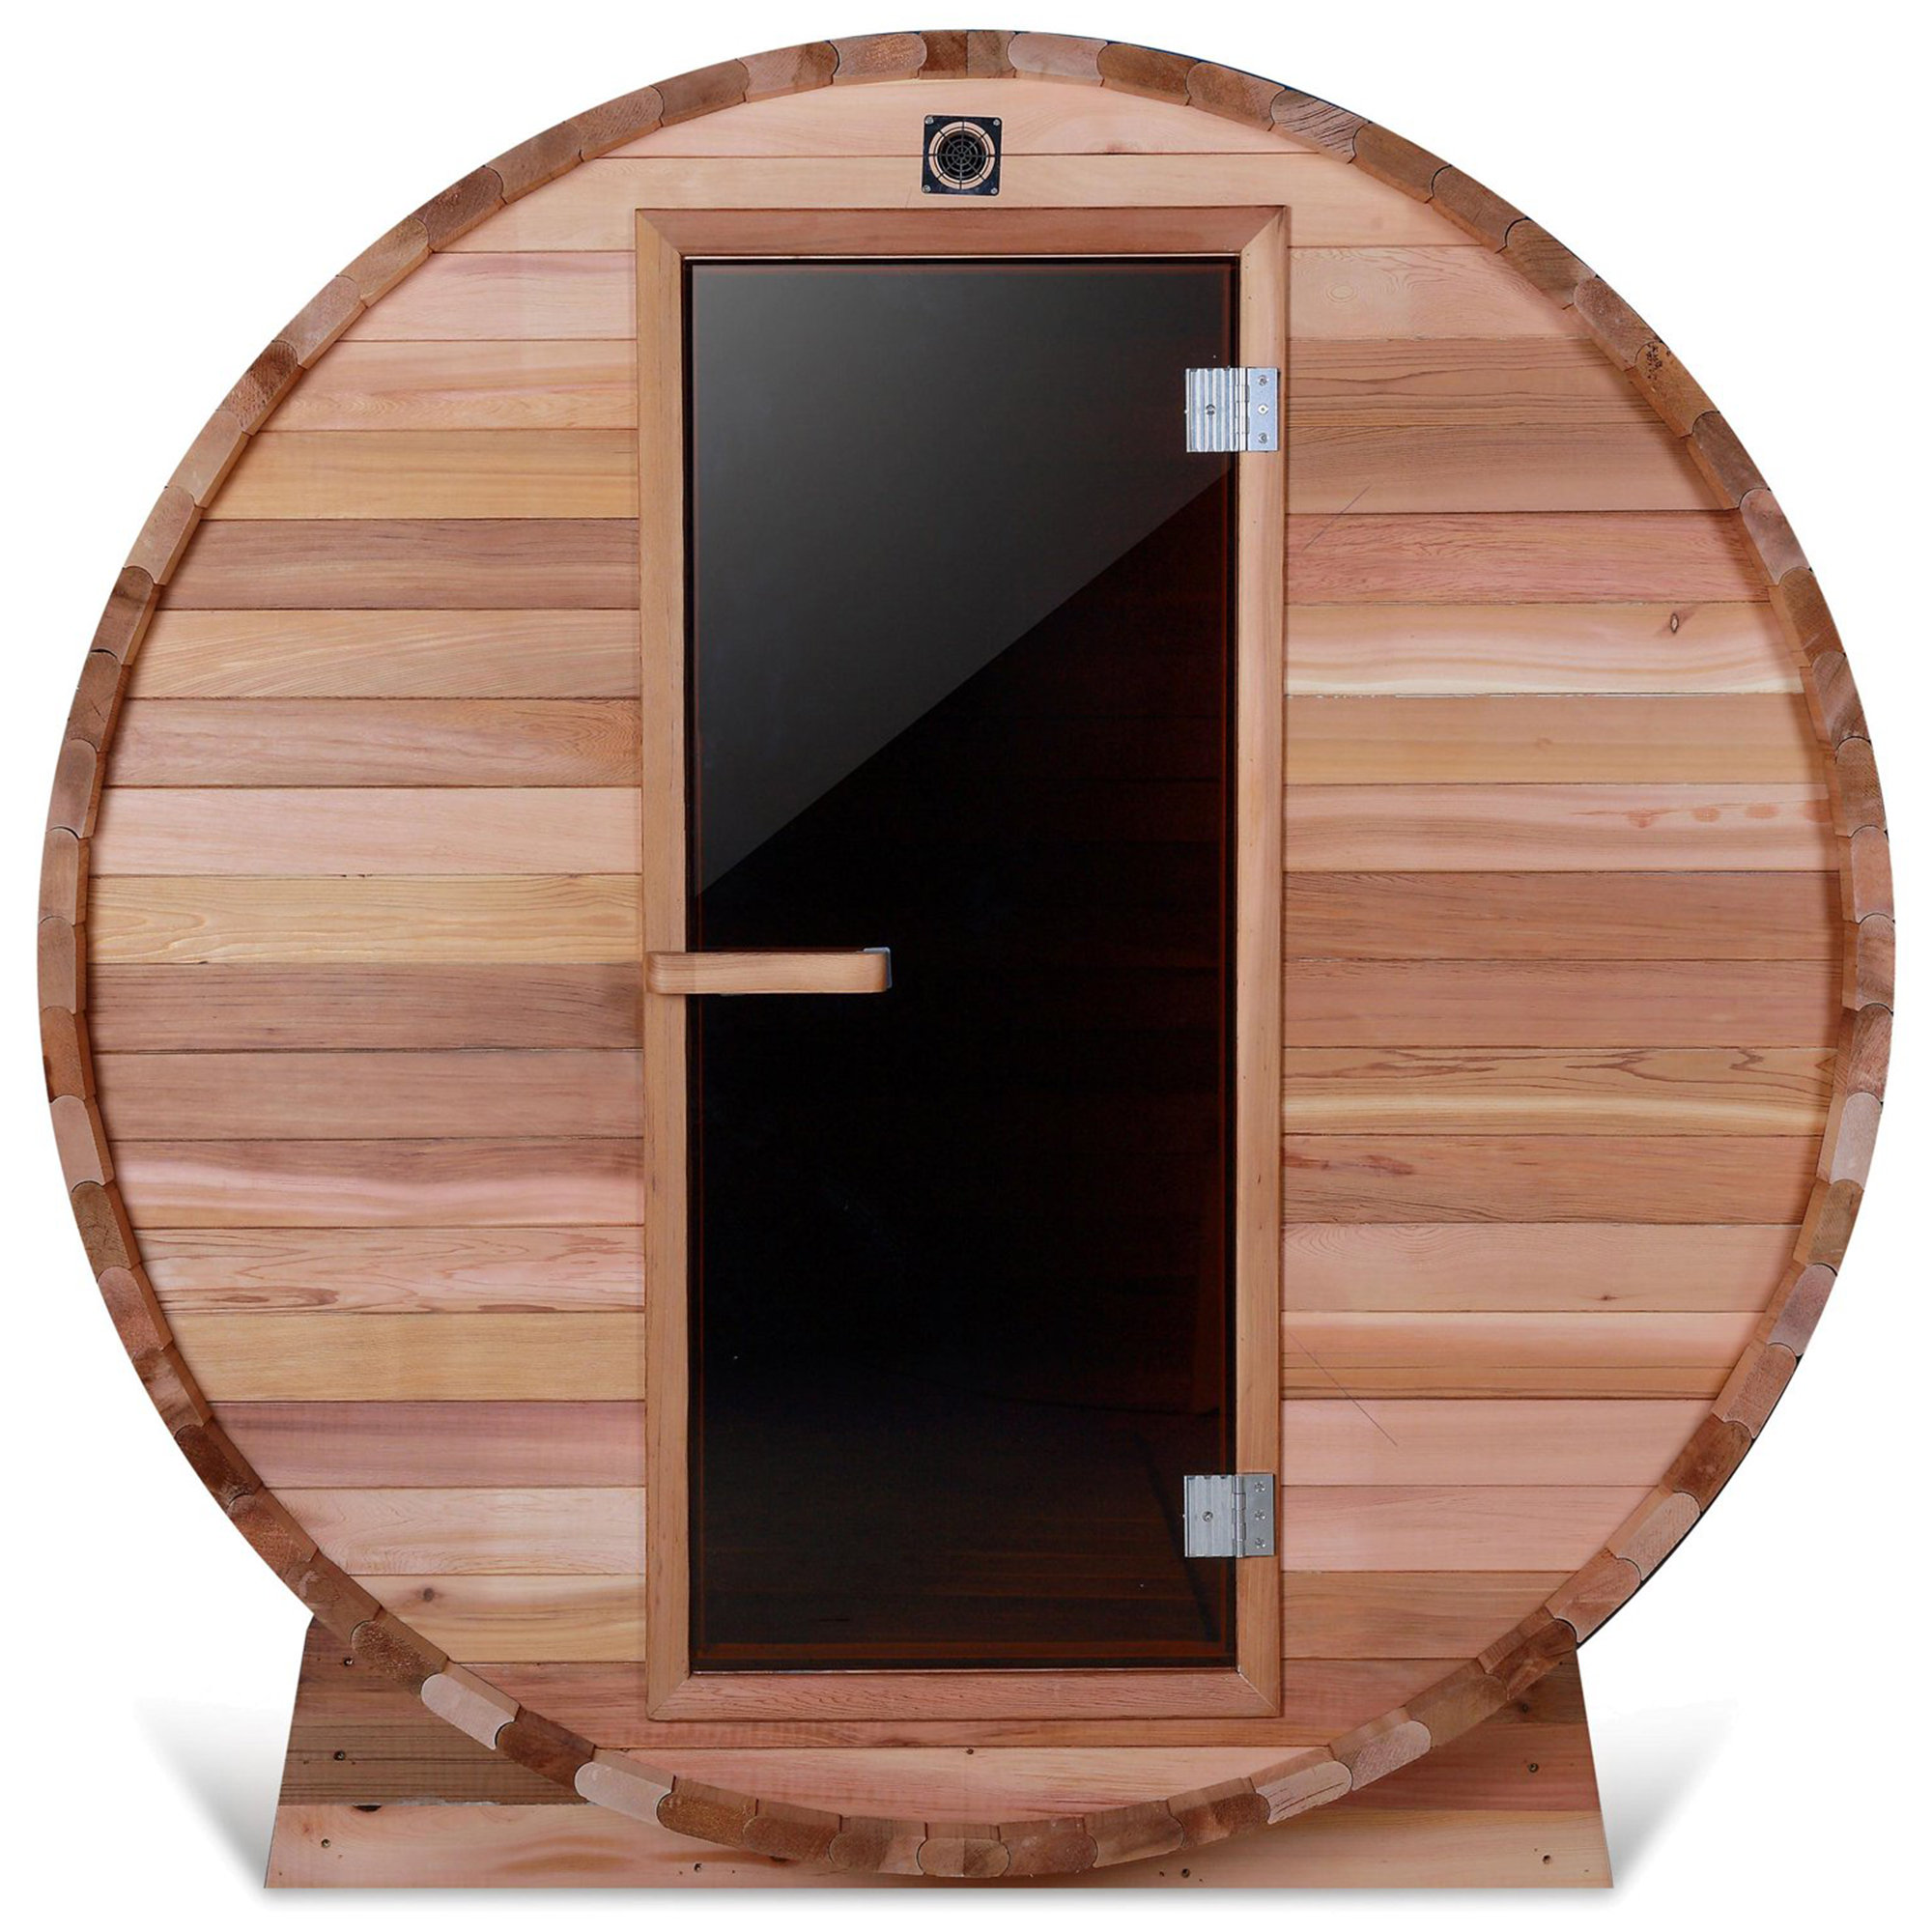 Sauna Accessory Packages  Thoughtfully Assembled Sauna Accessories